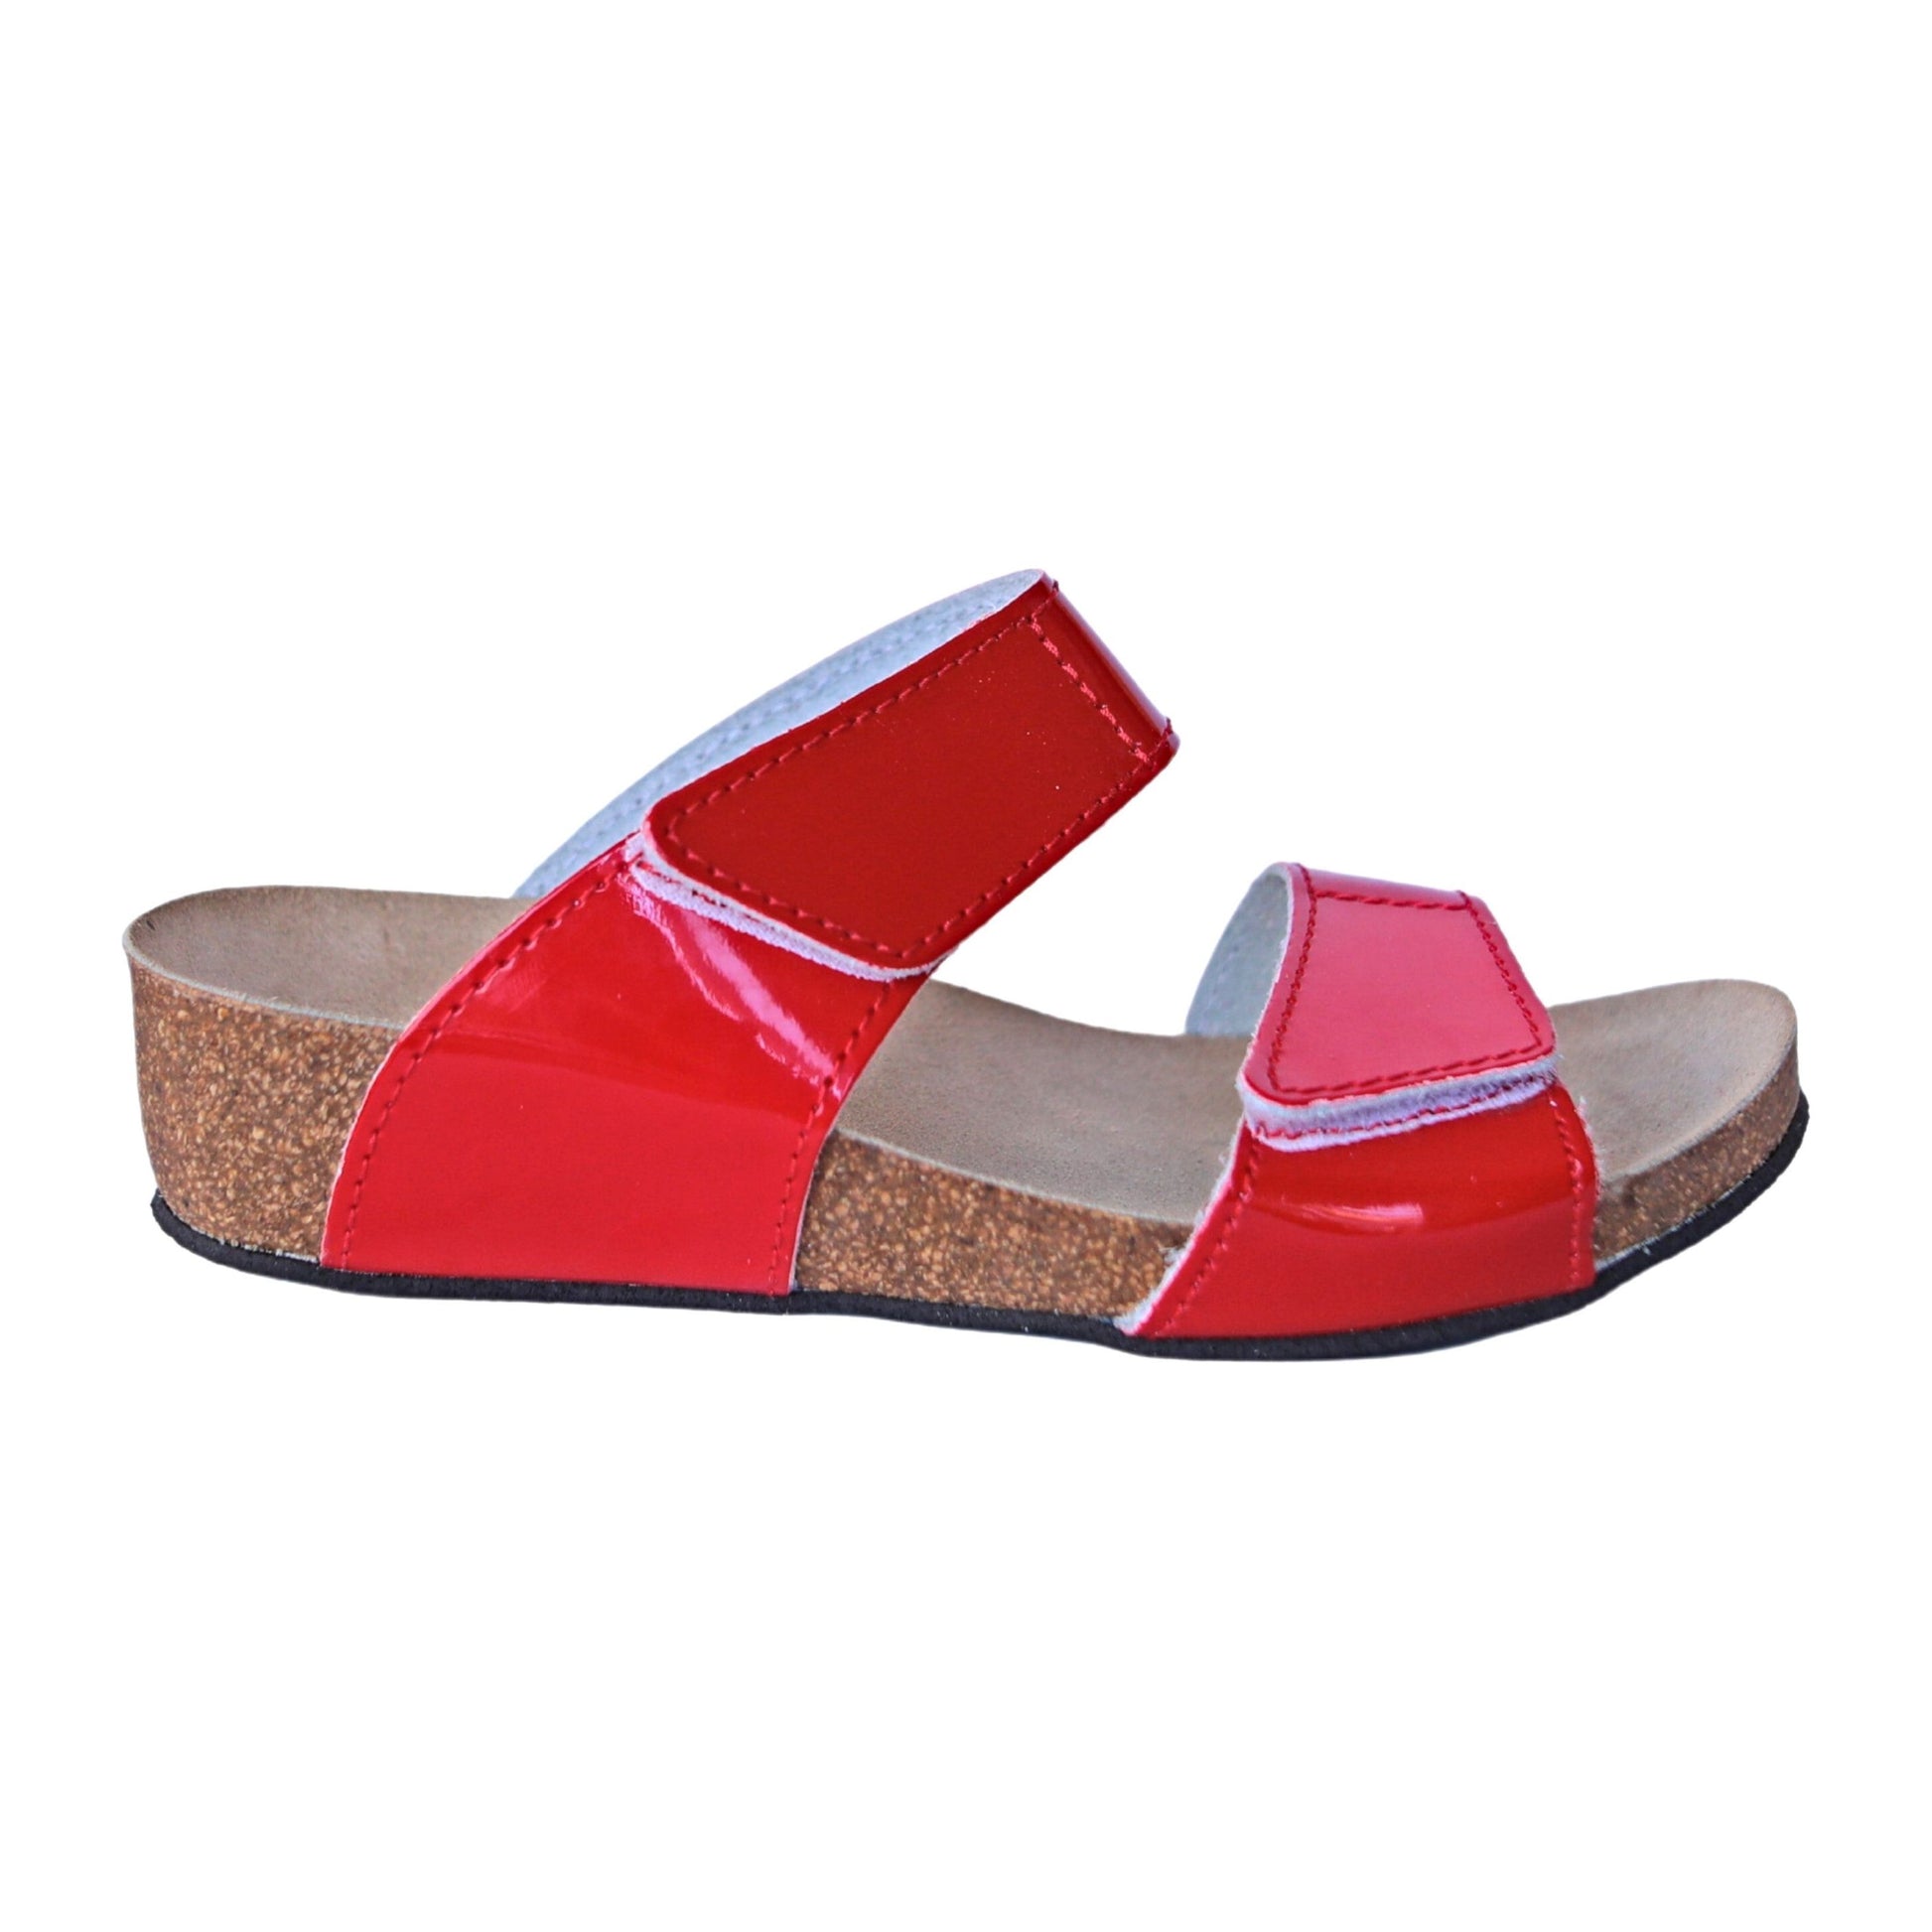 Red glossy Cork orthopaedic wedge sandals prolong your legs by 4 cm. Comfortable sandals for every day prevent a foot arch collapse.